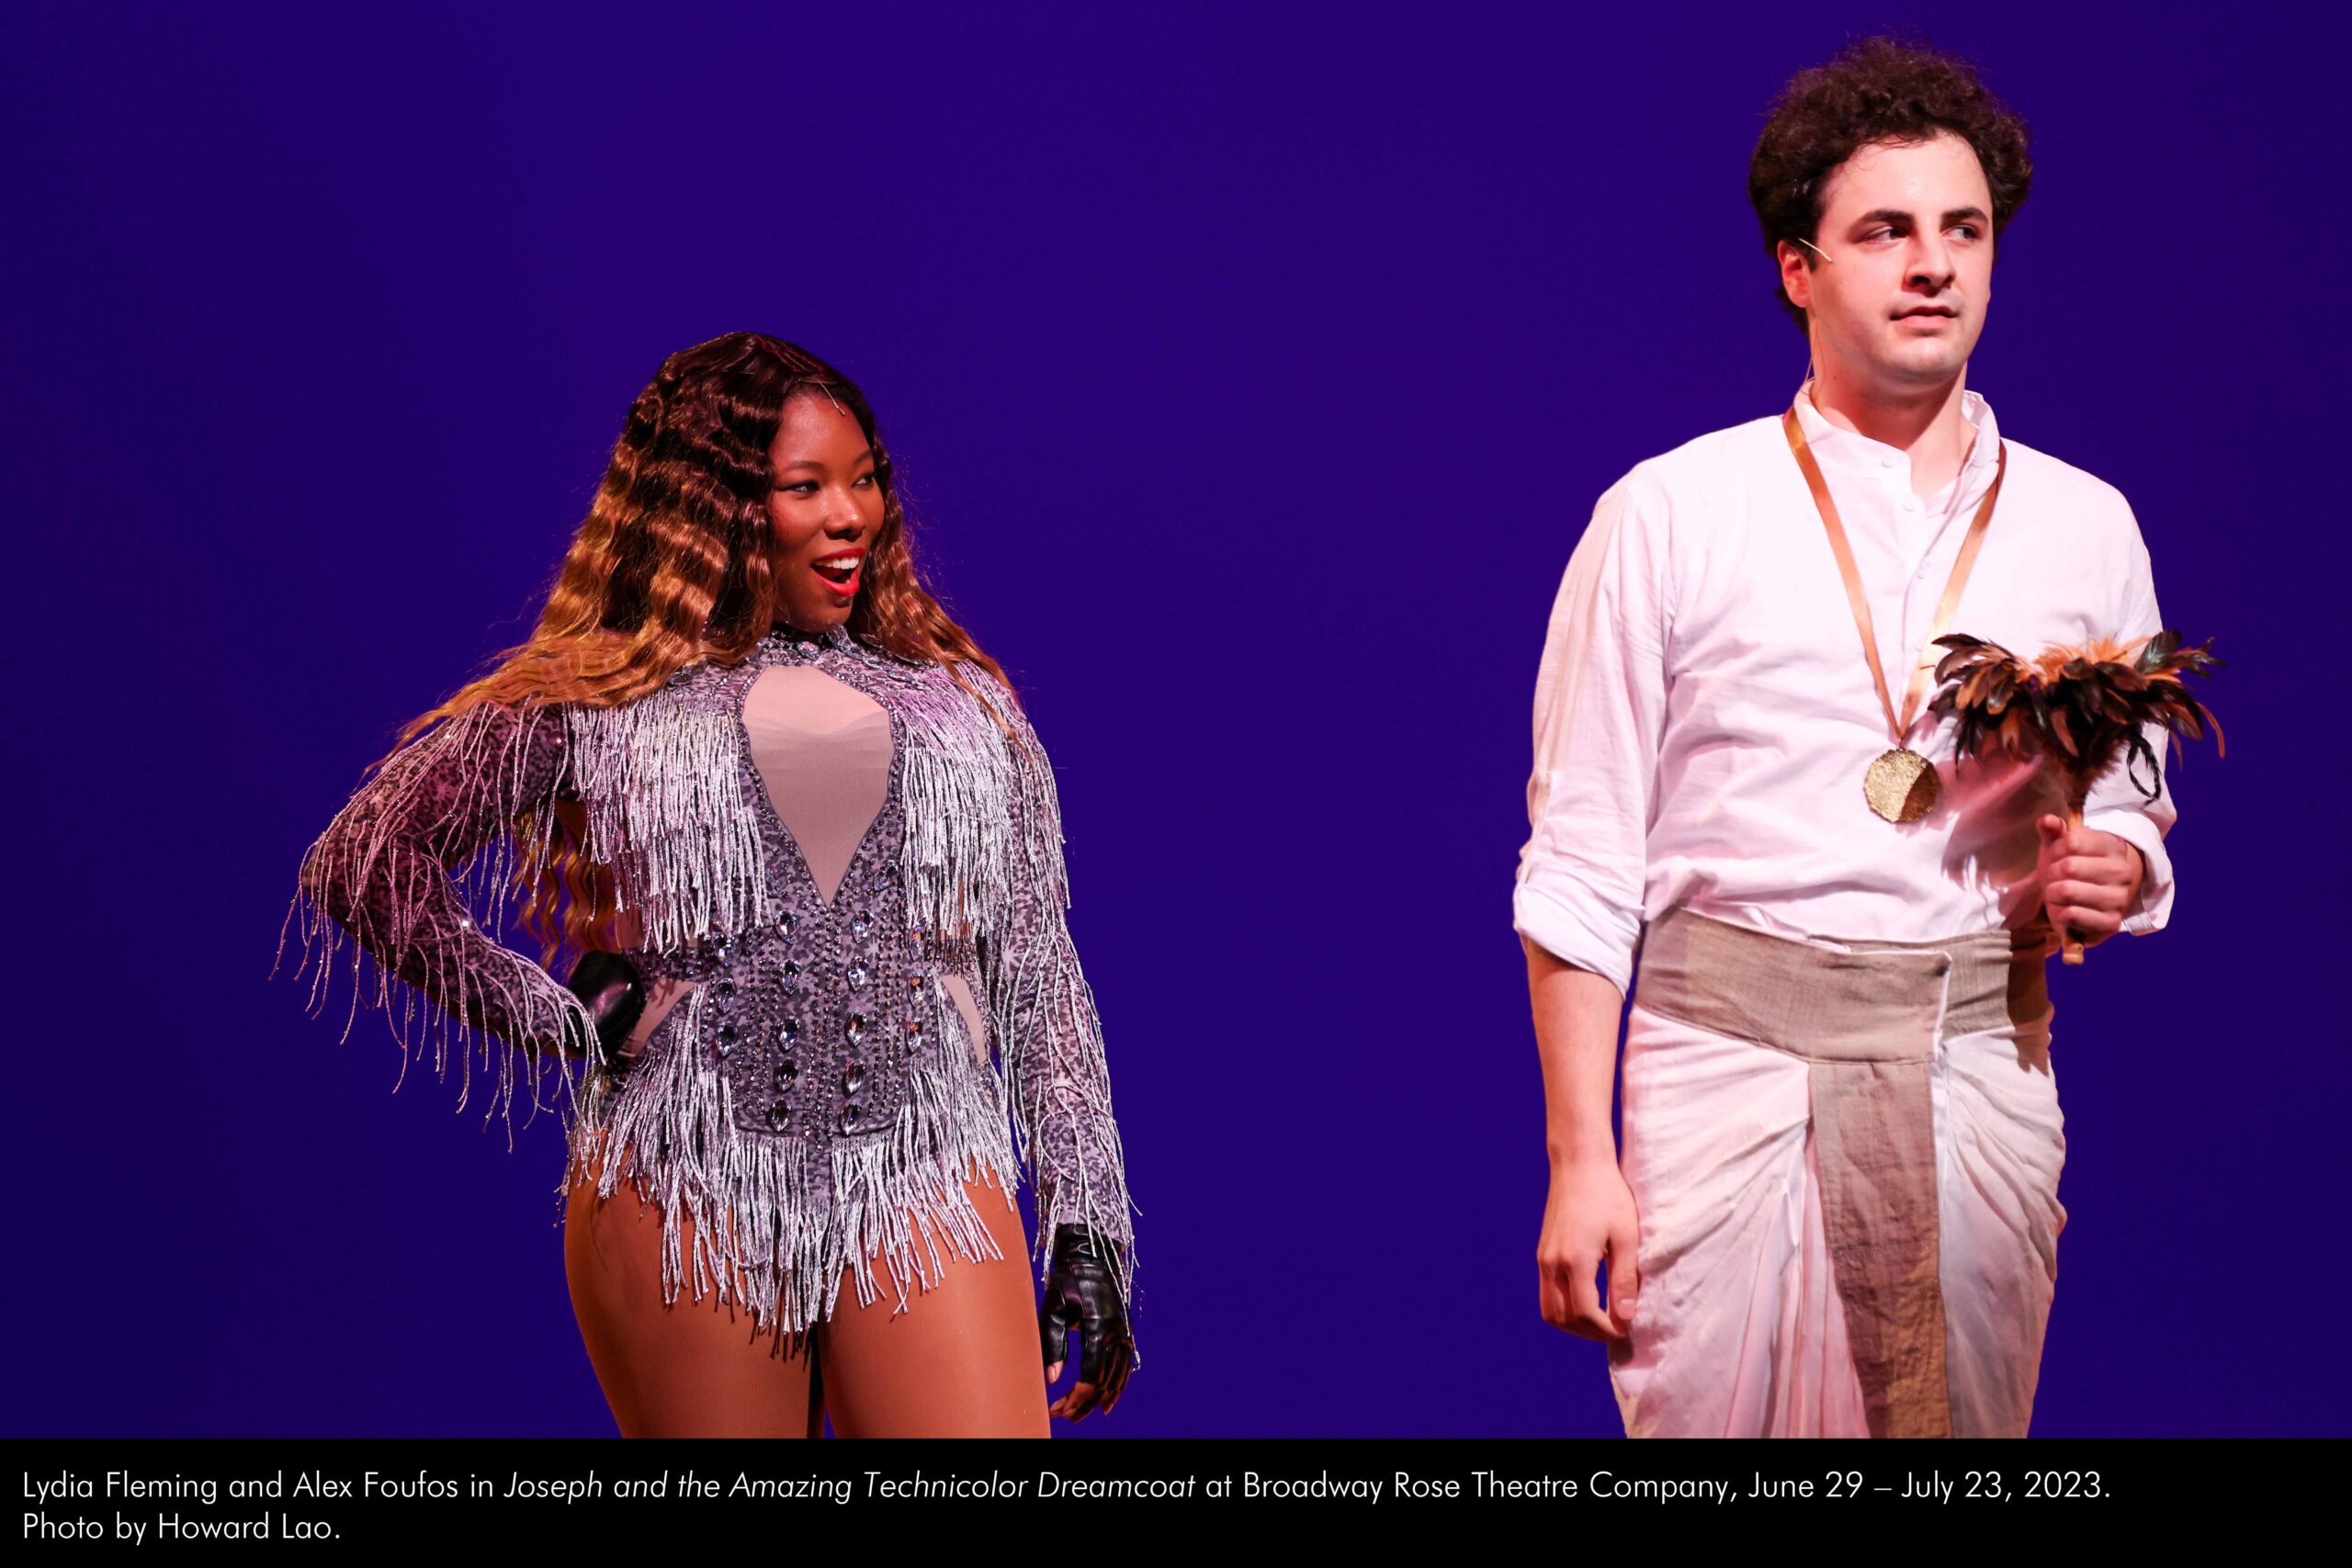 Lydia Fleming and Alex Foufos in Joseph and the Amazing Technicolor Dreamcoat at Broadway Rose Theatre Company, June 29 - July 23, 2023. Photo by Howard Lao.